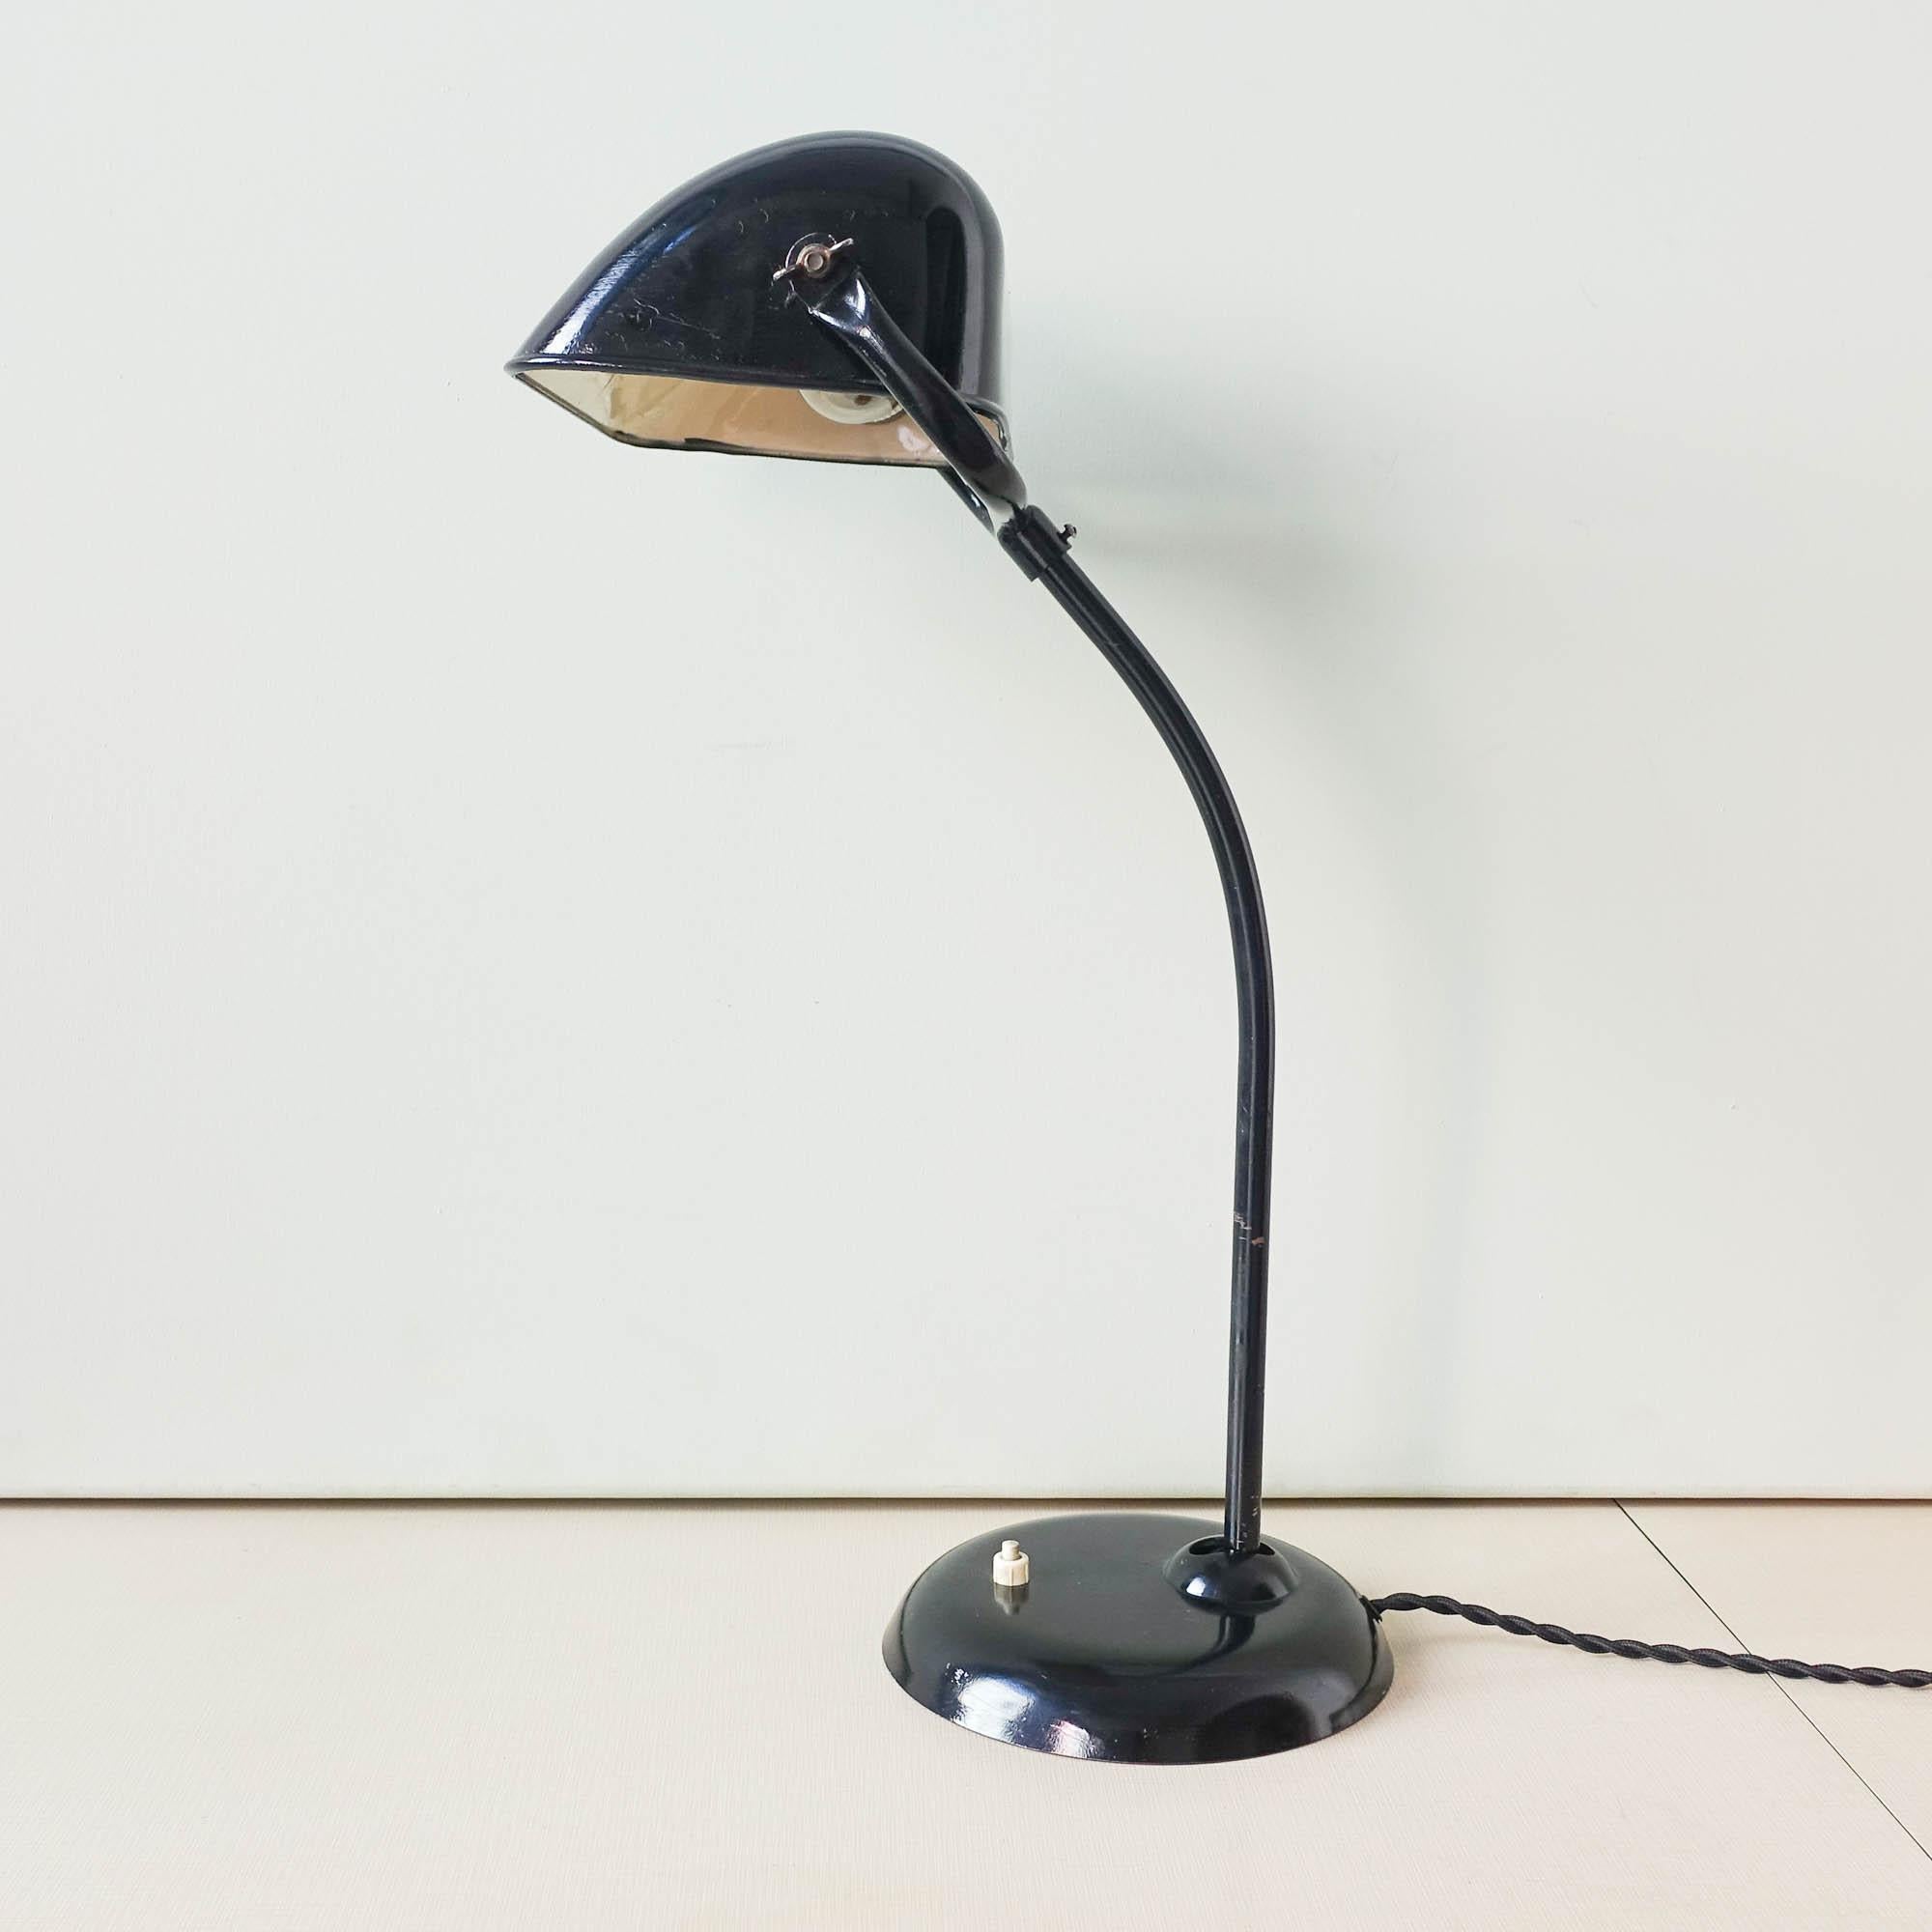 This is a very rare Bauhaus bankers lamp from Kaiser Idell, model 6581, designed by Christian Dell during the 1930's. It can be bent forward or backwards and the lampshade is also adjustable and can be bent upwards or downwards. It is made in metal